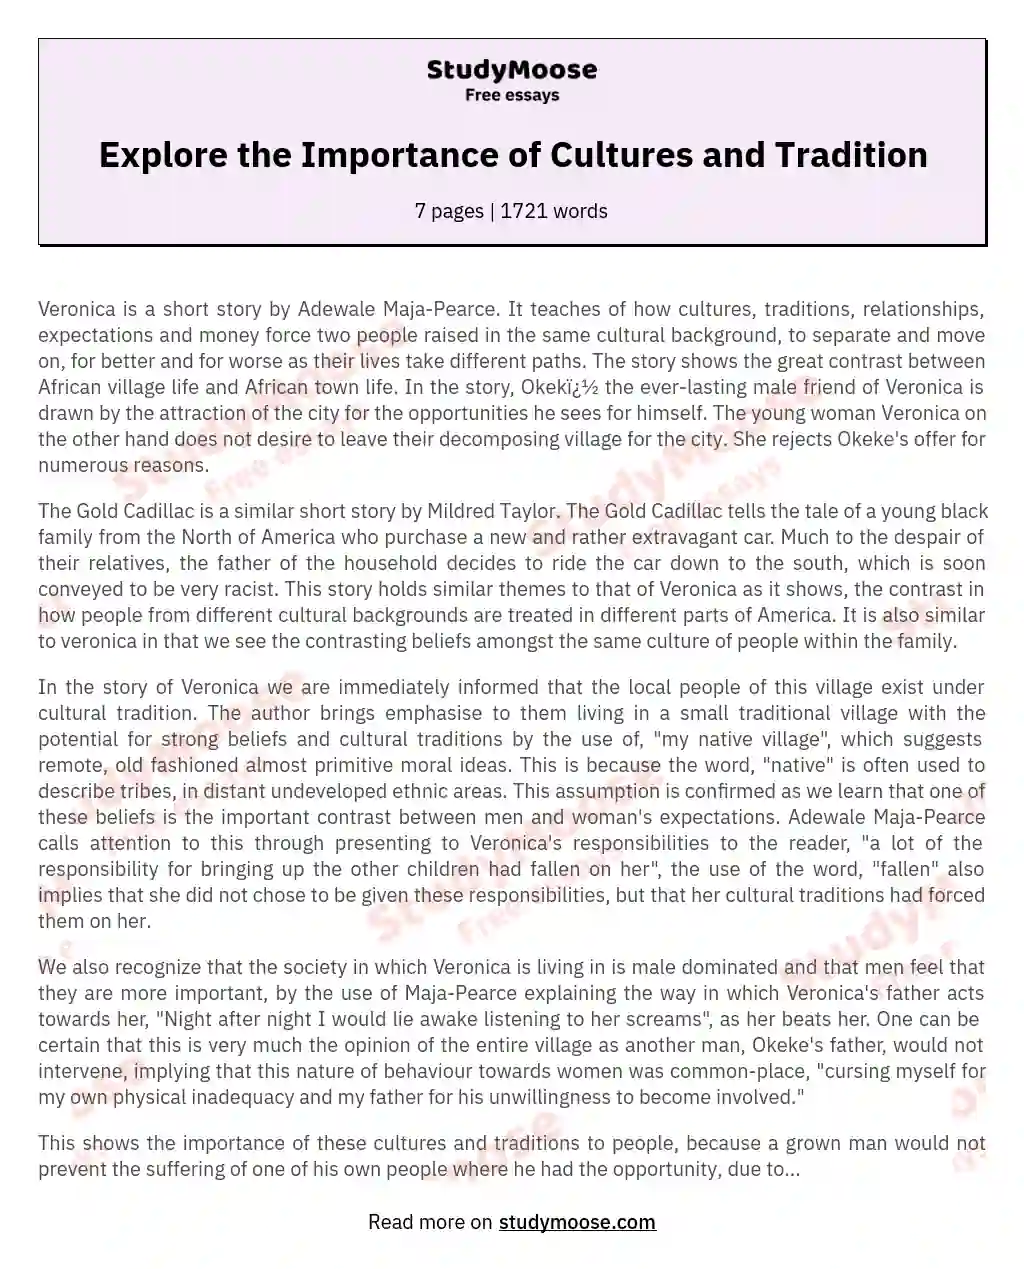 Explore the Importance of Cultures and Tradition essay